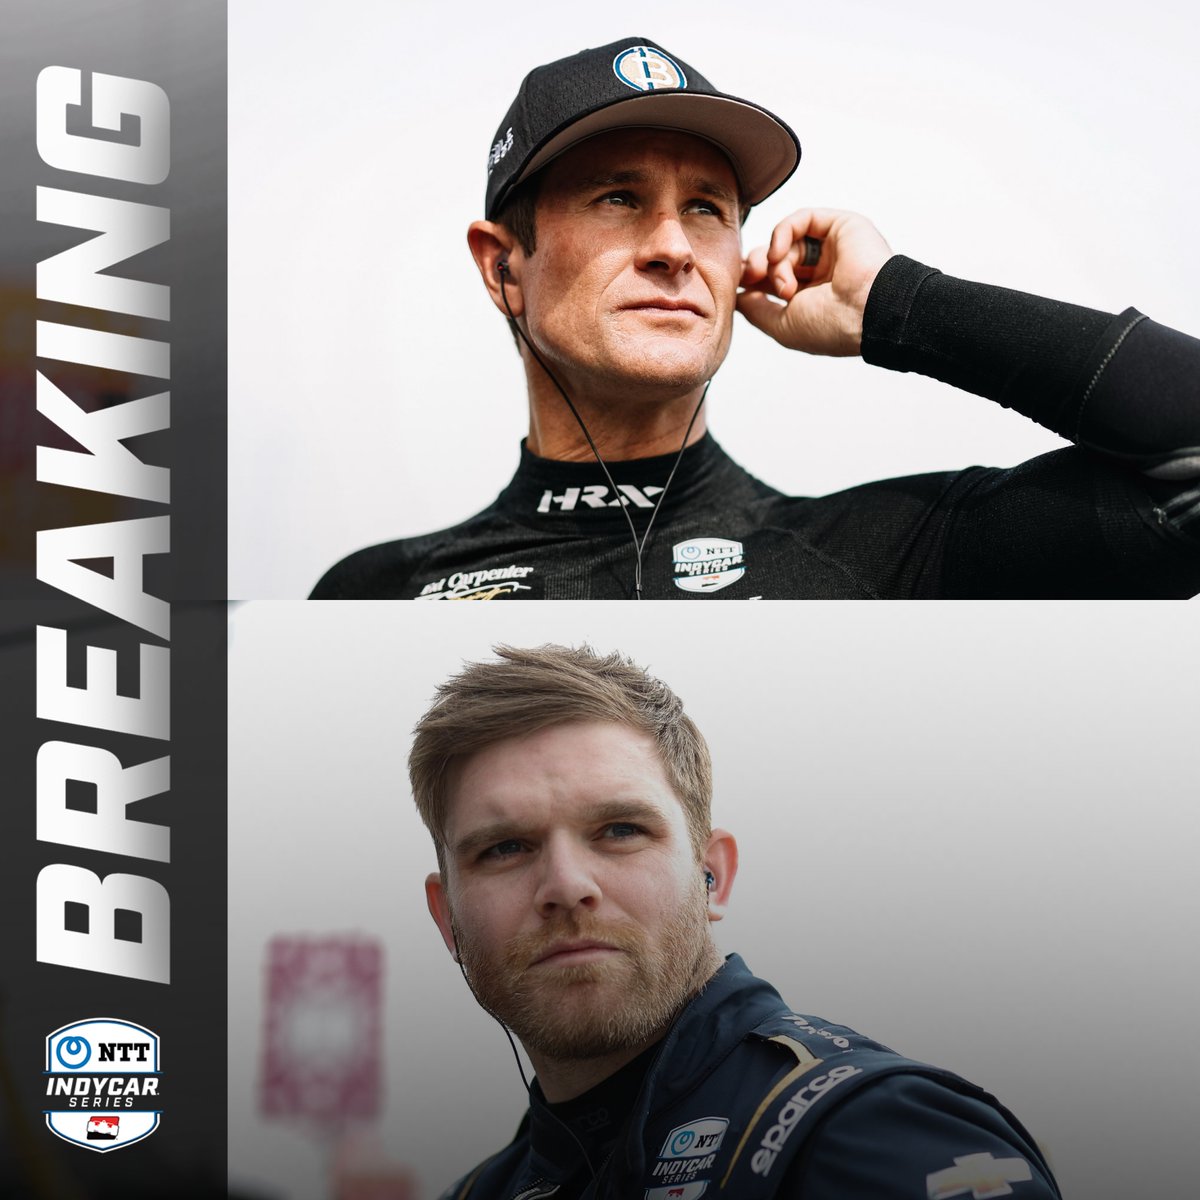 BREAKING: @RyanHunterReay and @ConorDaly22 will pilot two entries for Dreyer & Reinbold Racing and Cusick Motorsports in the 108th Running of the #Indy500. #INDYCAR // @DreyerReinbold // @CusickMSports